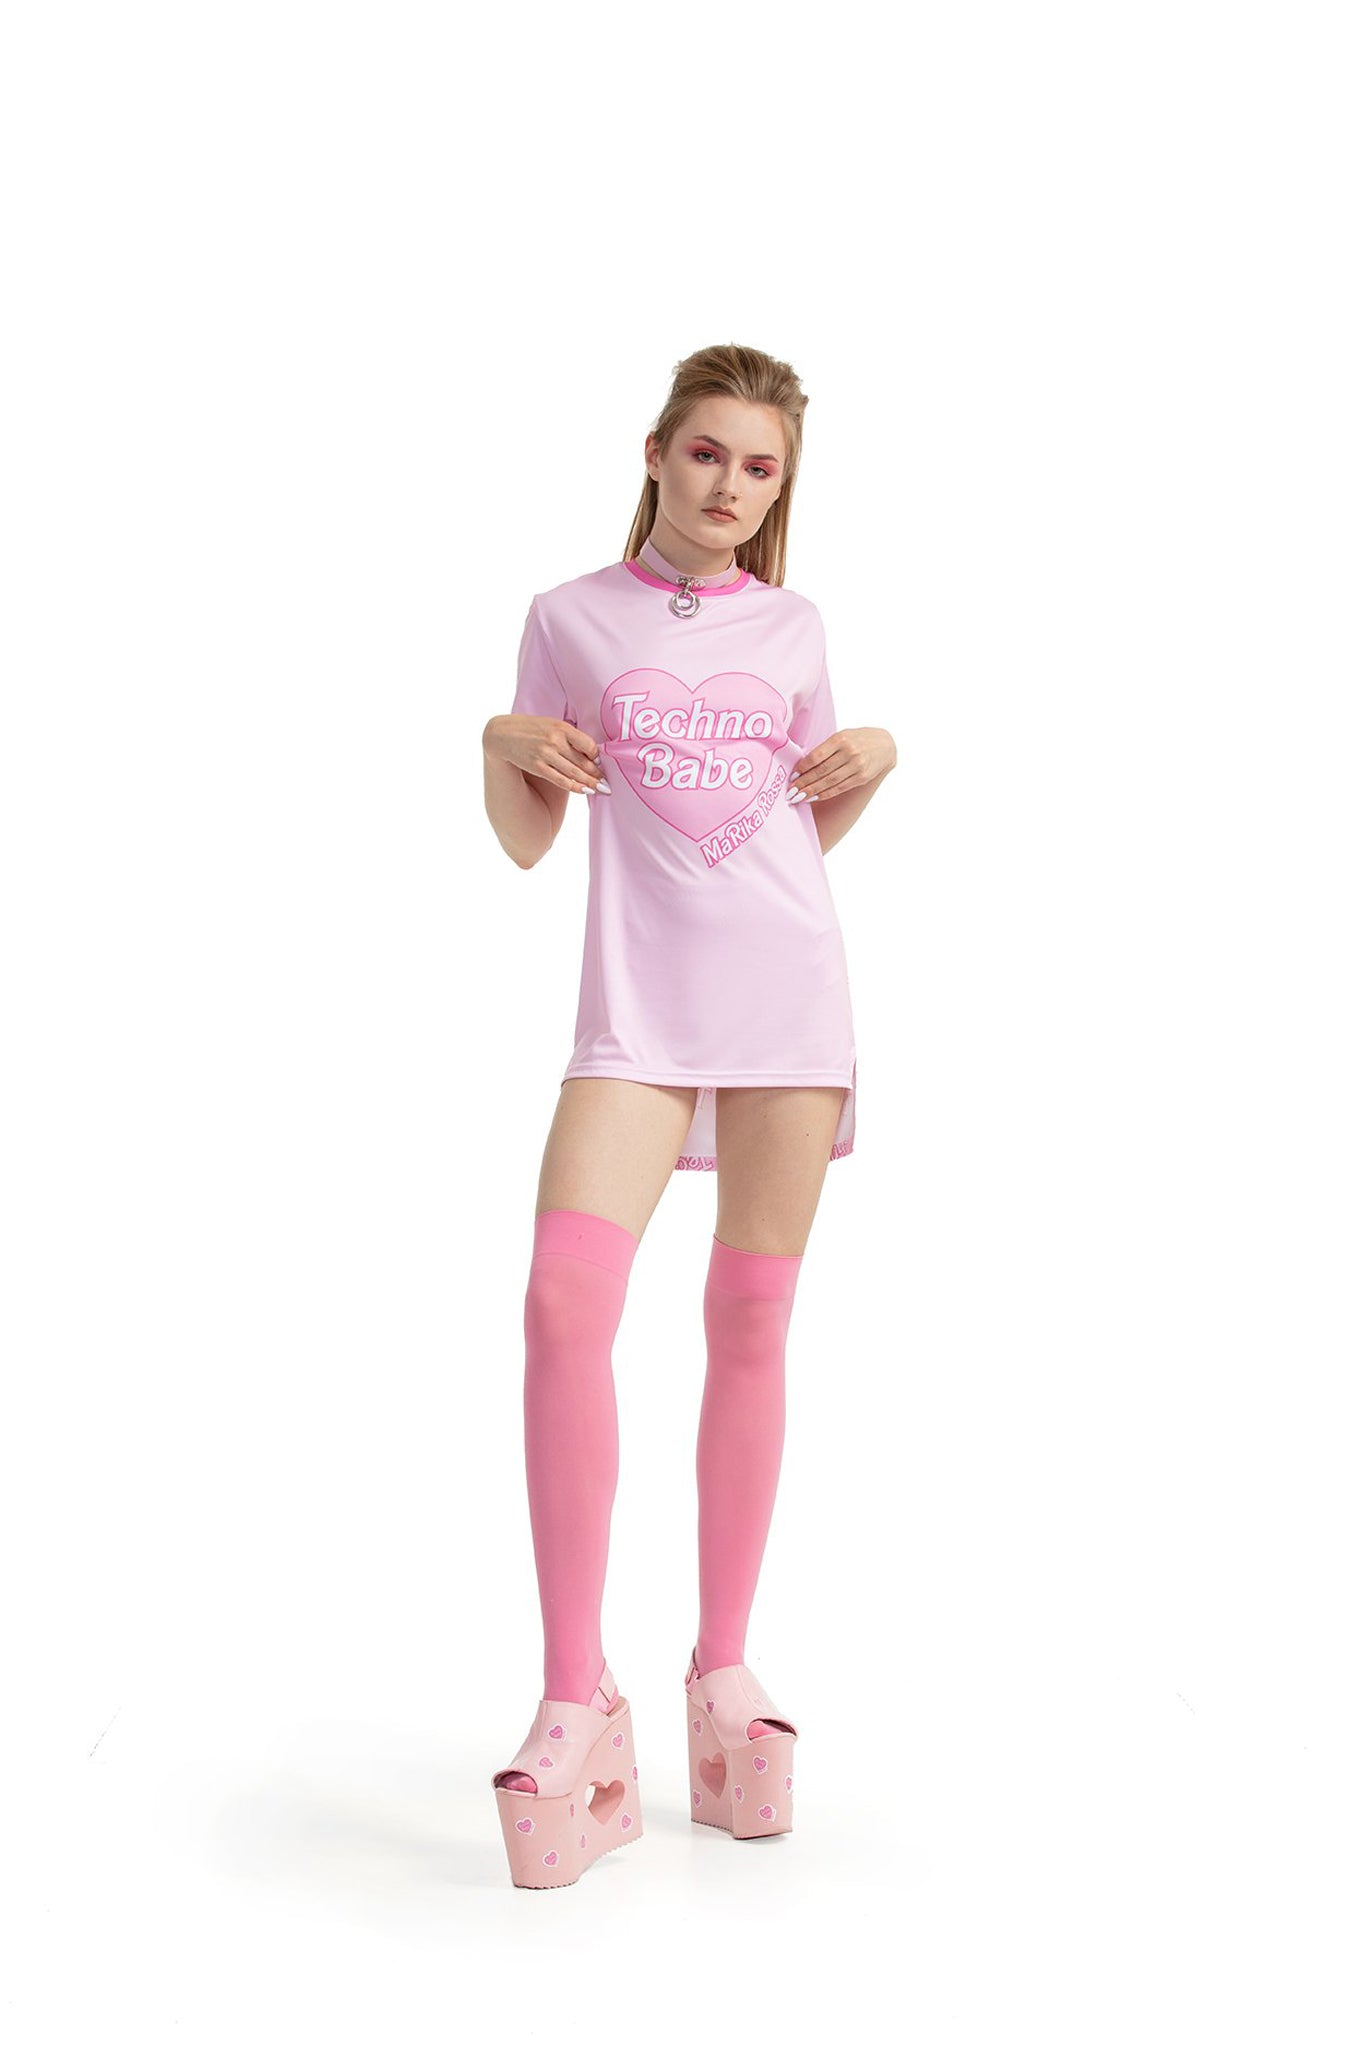 Techno Babe [Pink] - regular fit T-shirt with side cuts